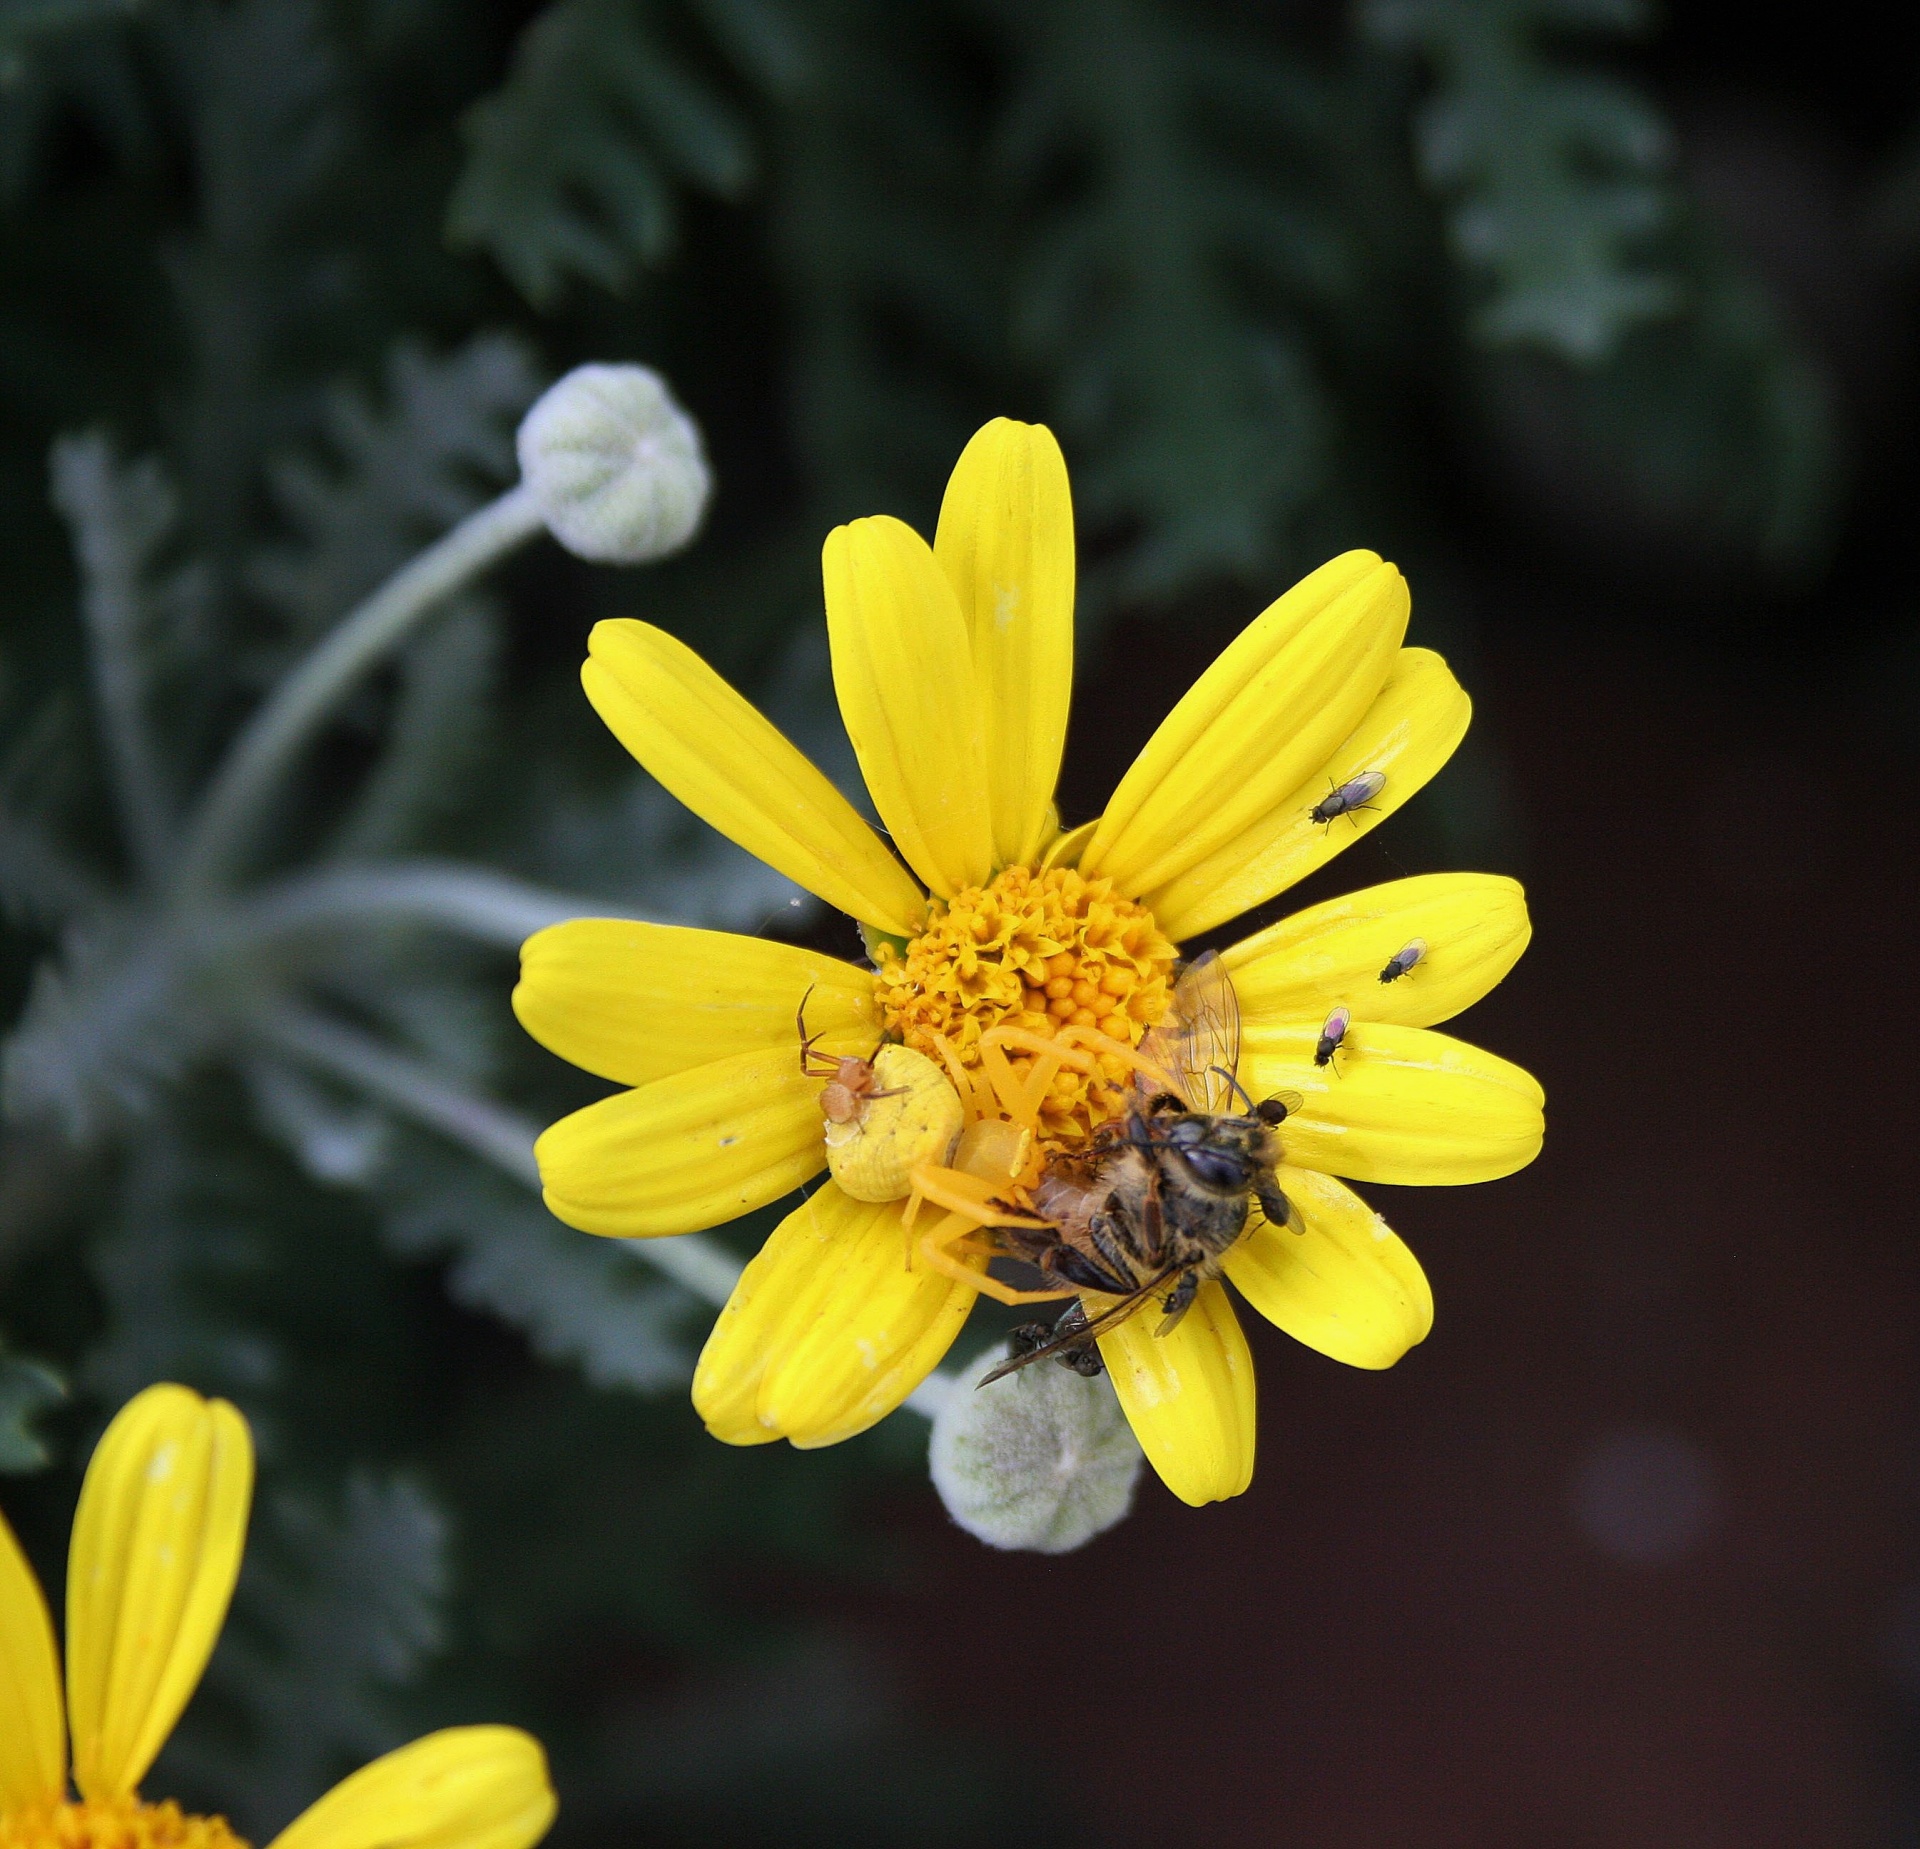 crab spiders dead bee being eaten free photo